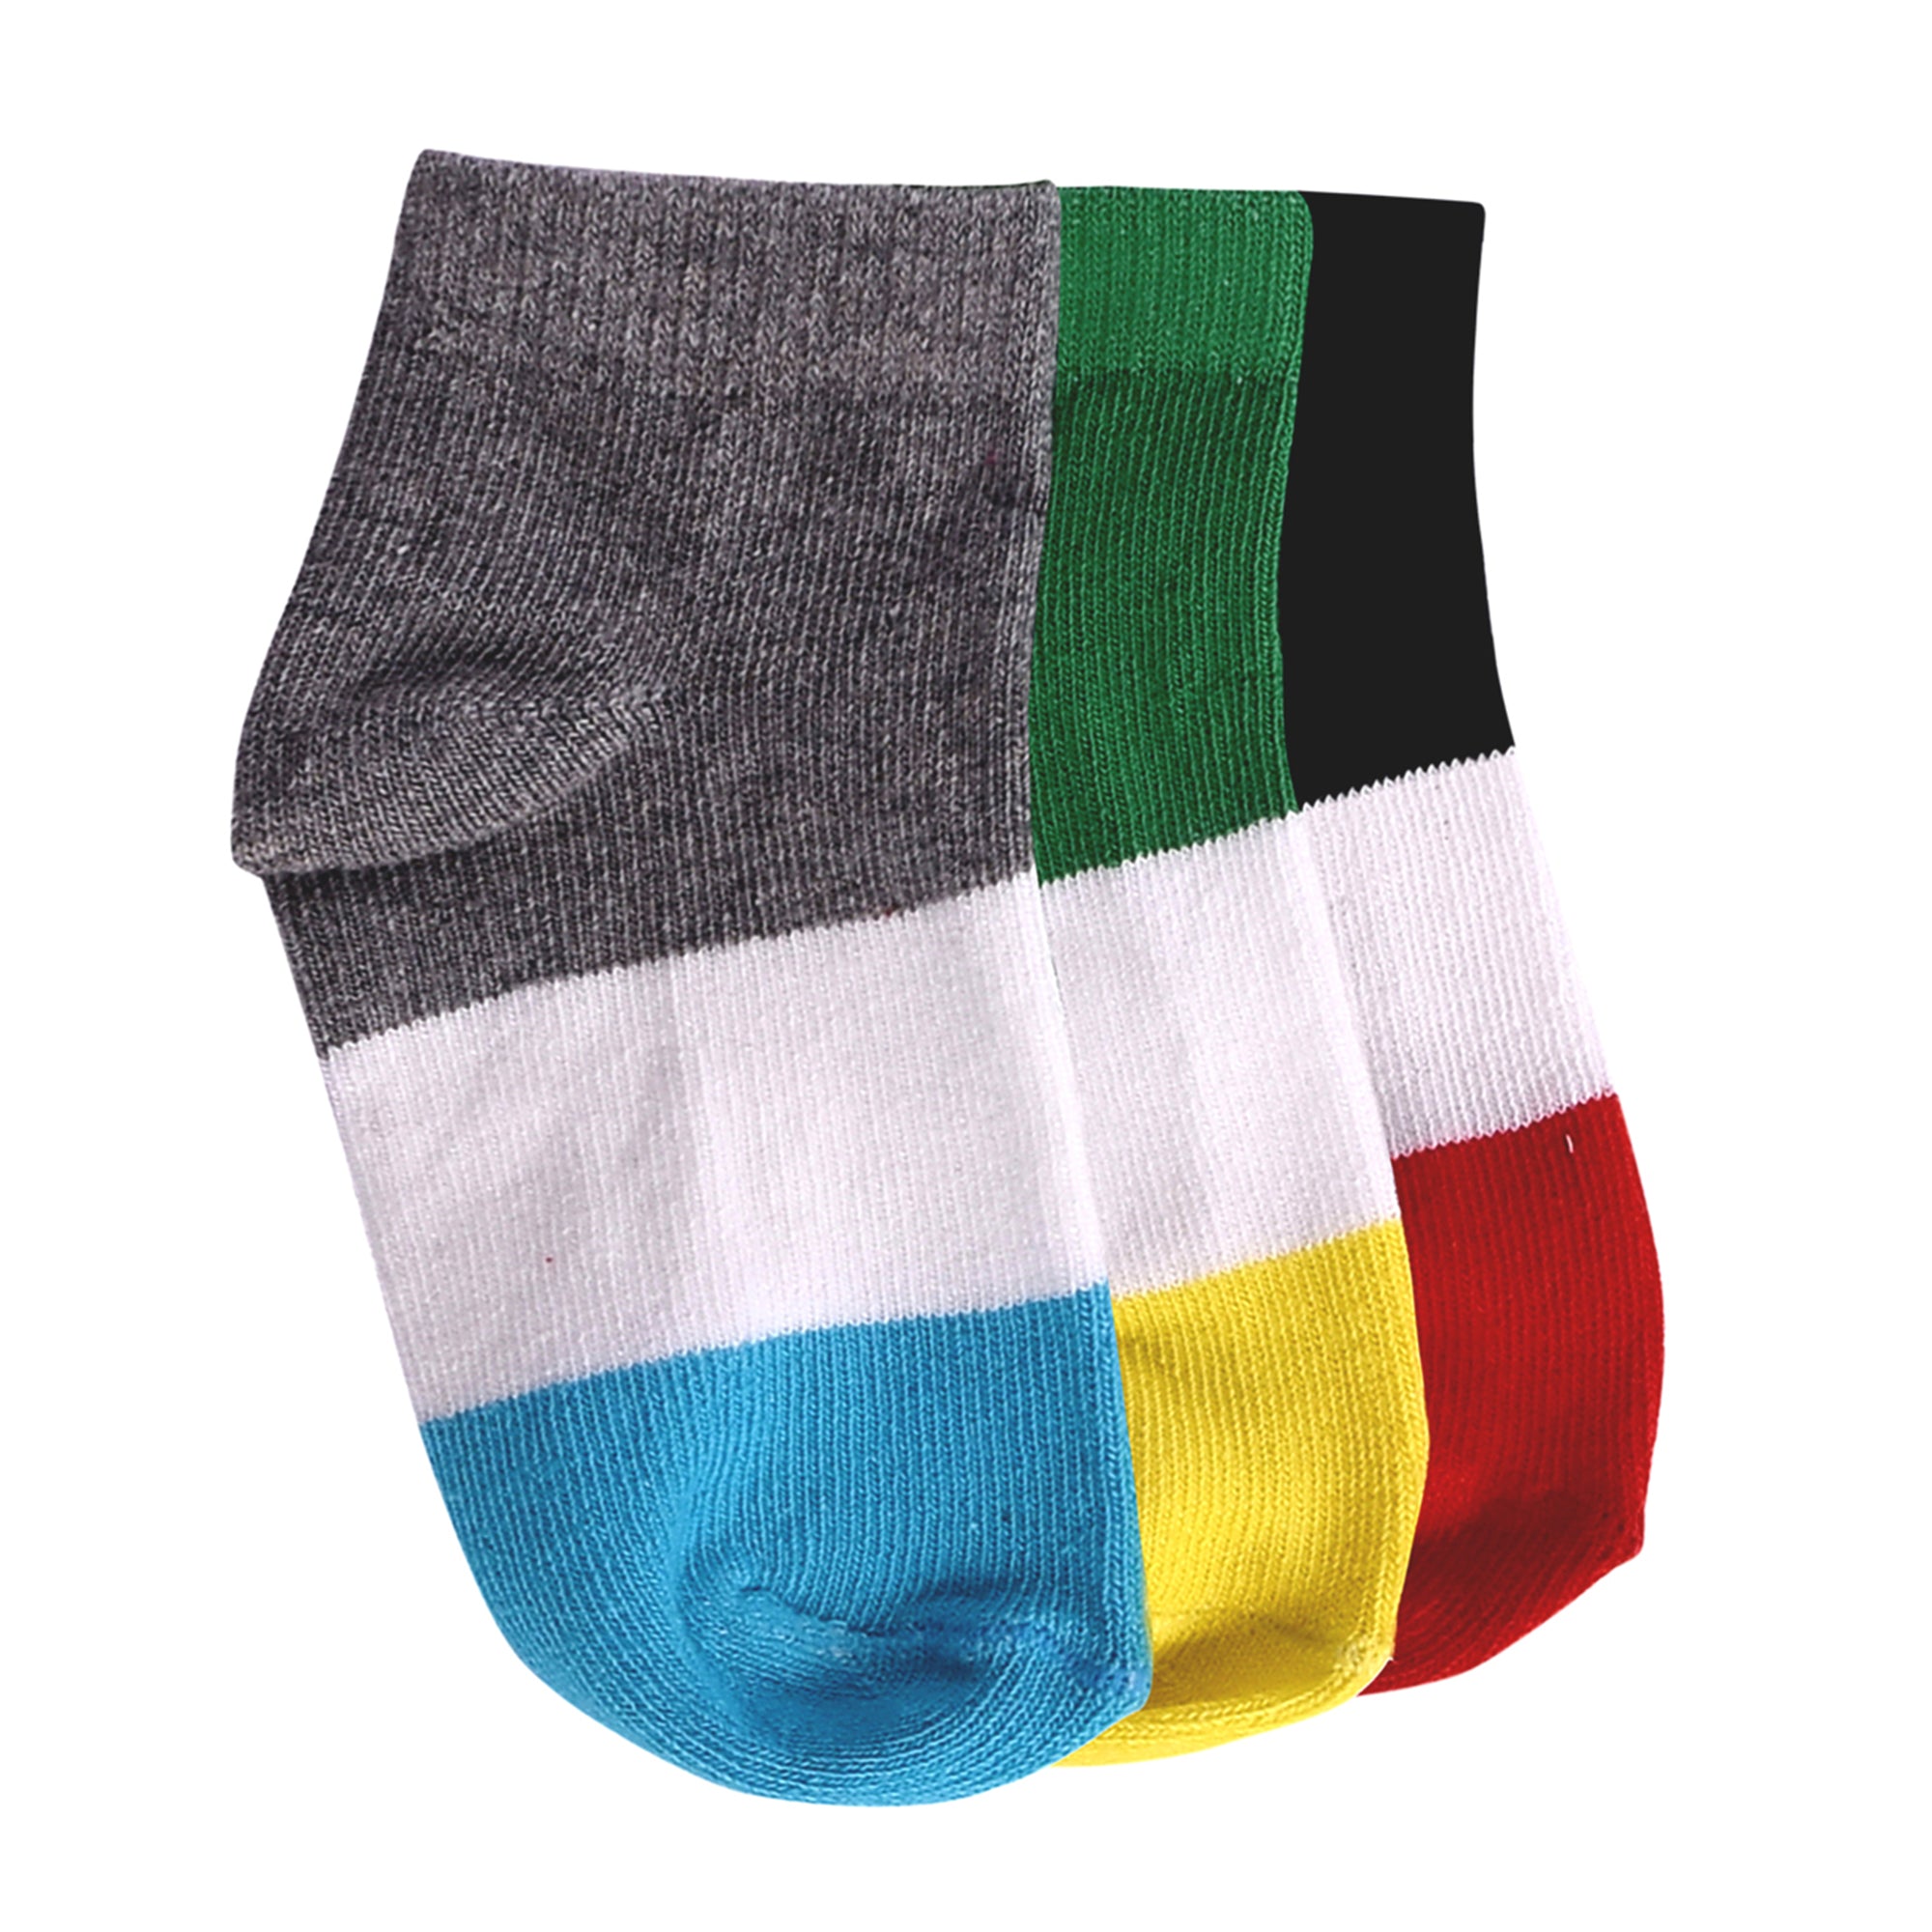 FOOTPRINTS Baby Boy's Organic Cotton Colourful Lowcut Socks (Multicolour, 0-6 Months) - Pack of 3 Pairs